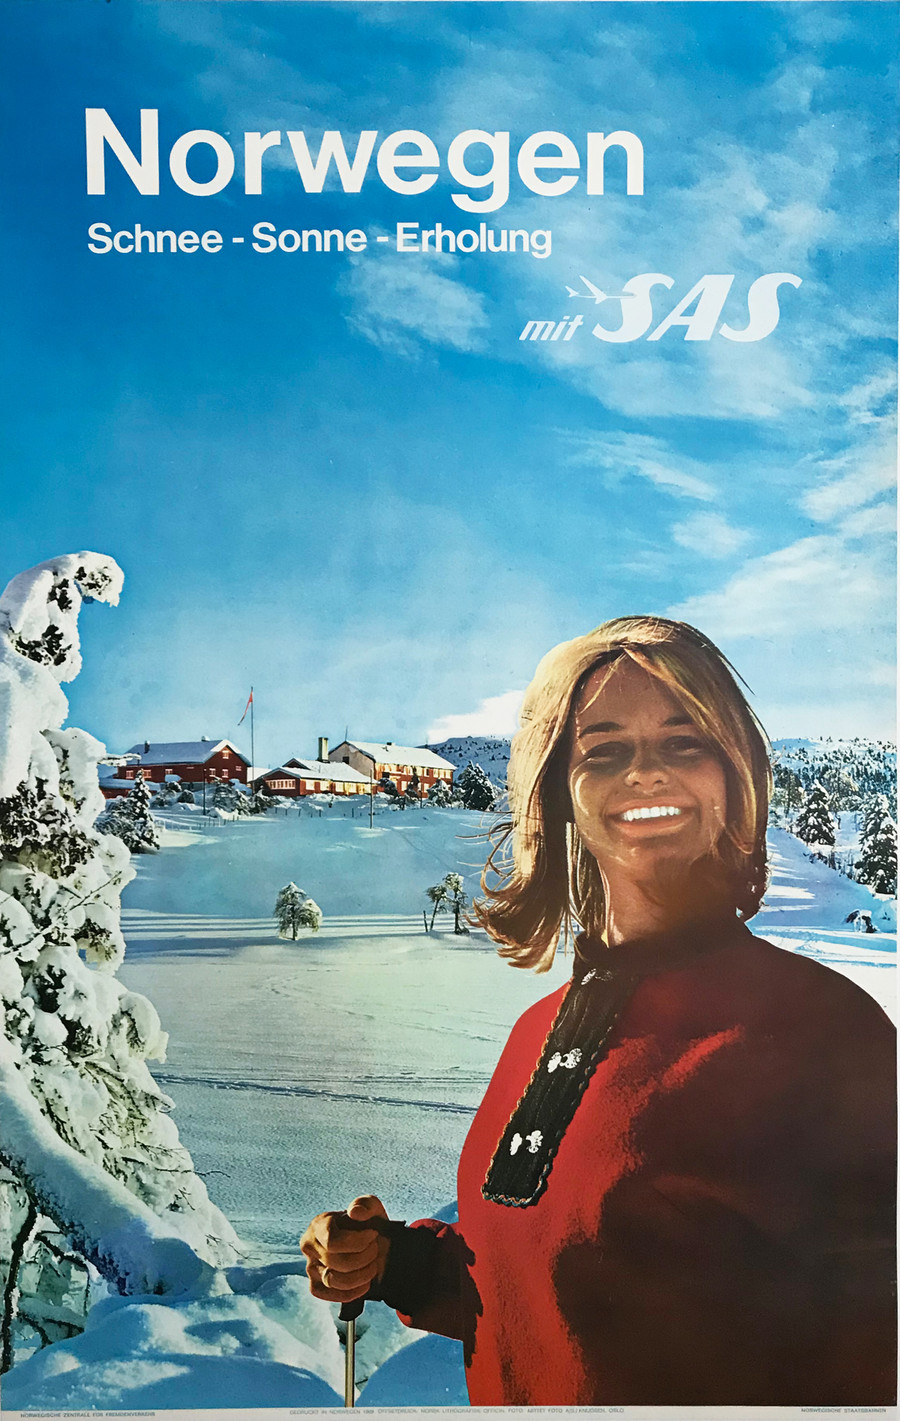 Norwegen SAS Airlines vintage airline  travel  poster from 1960s depicts blonde woman skiing